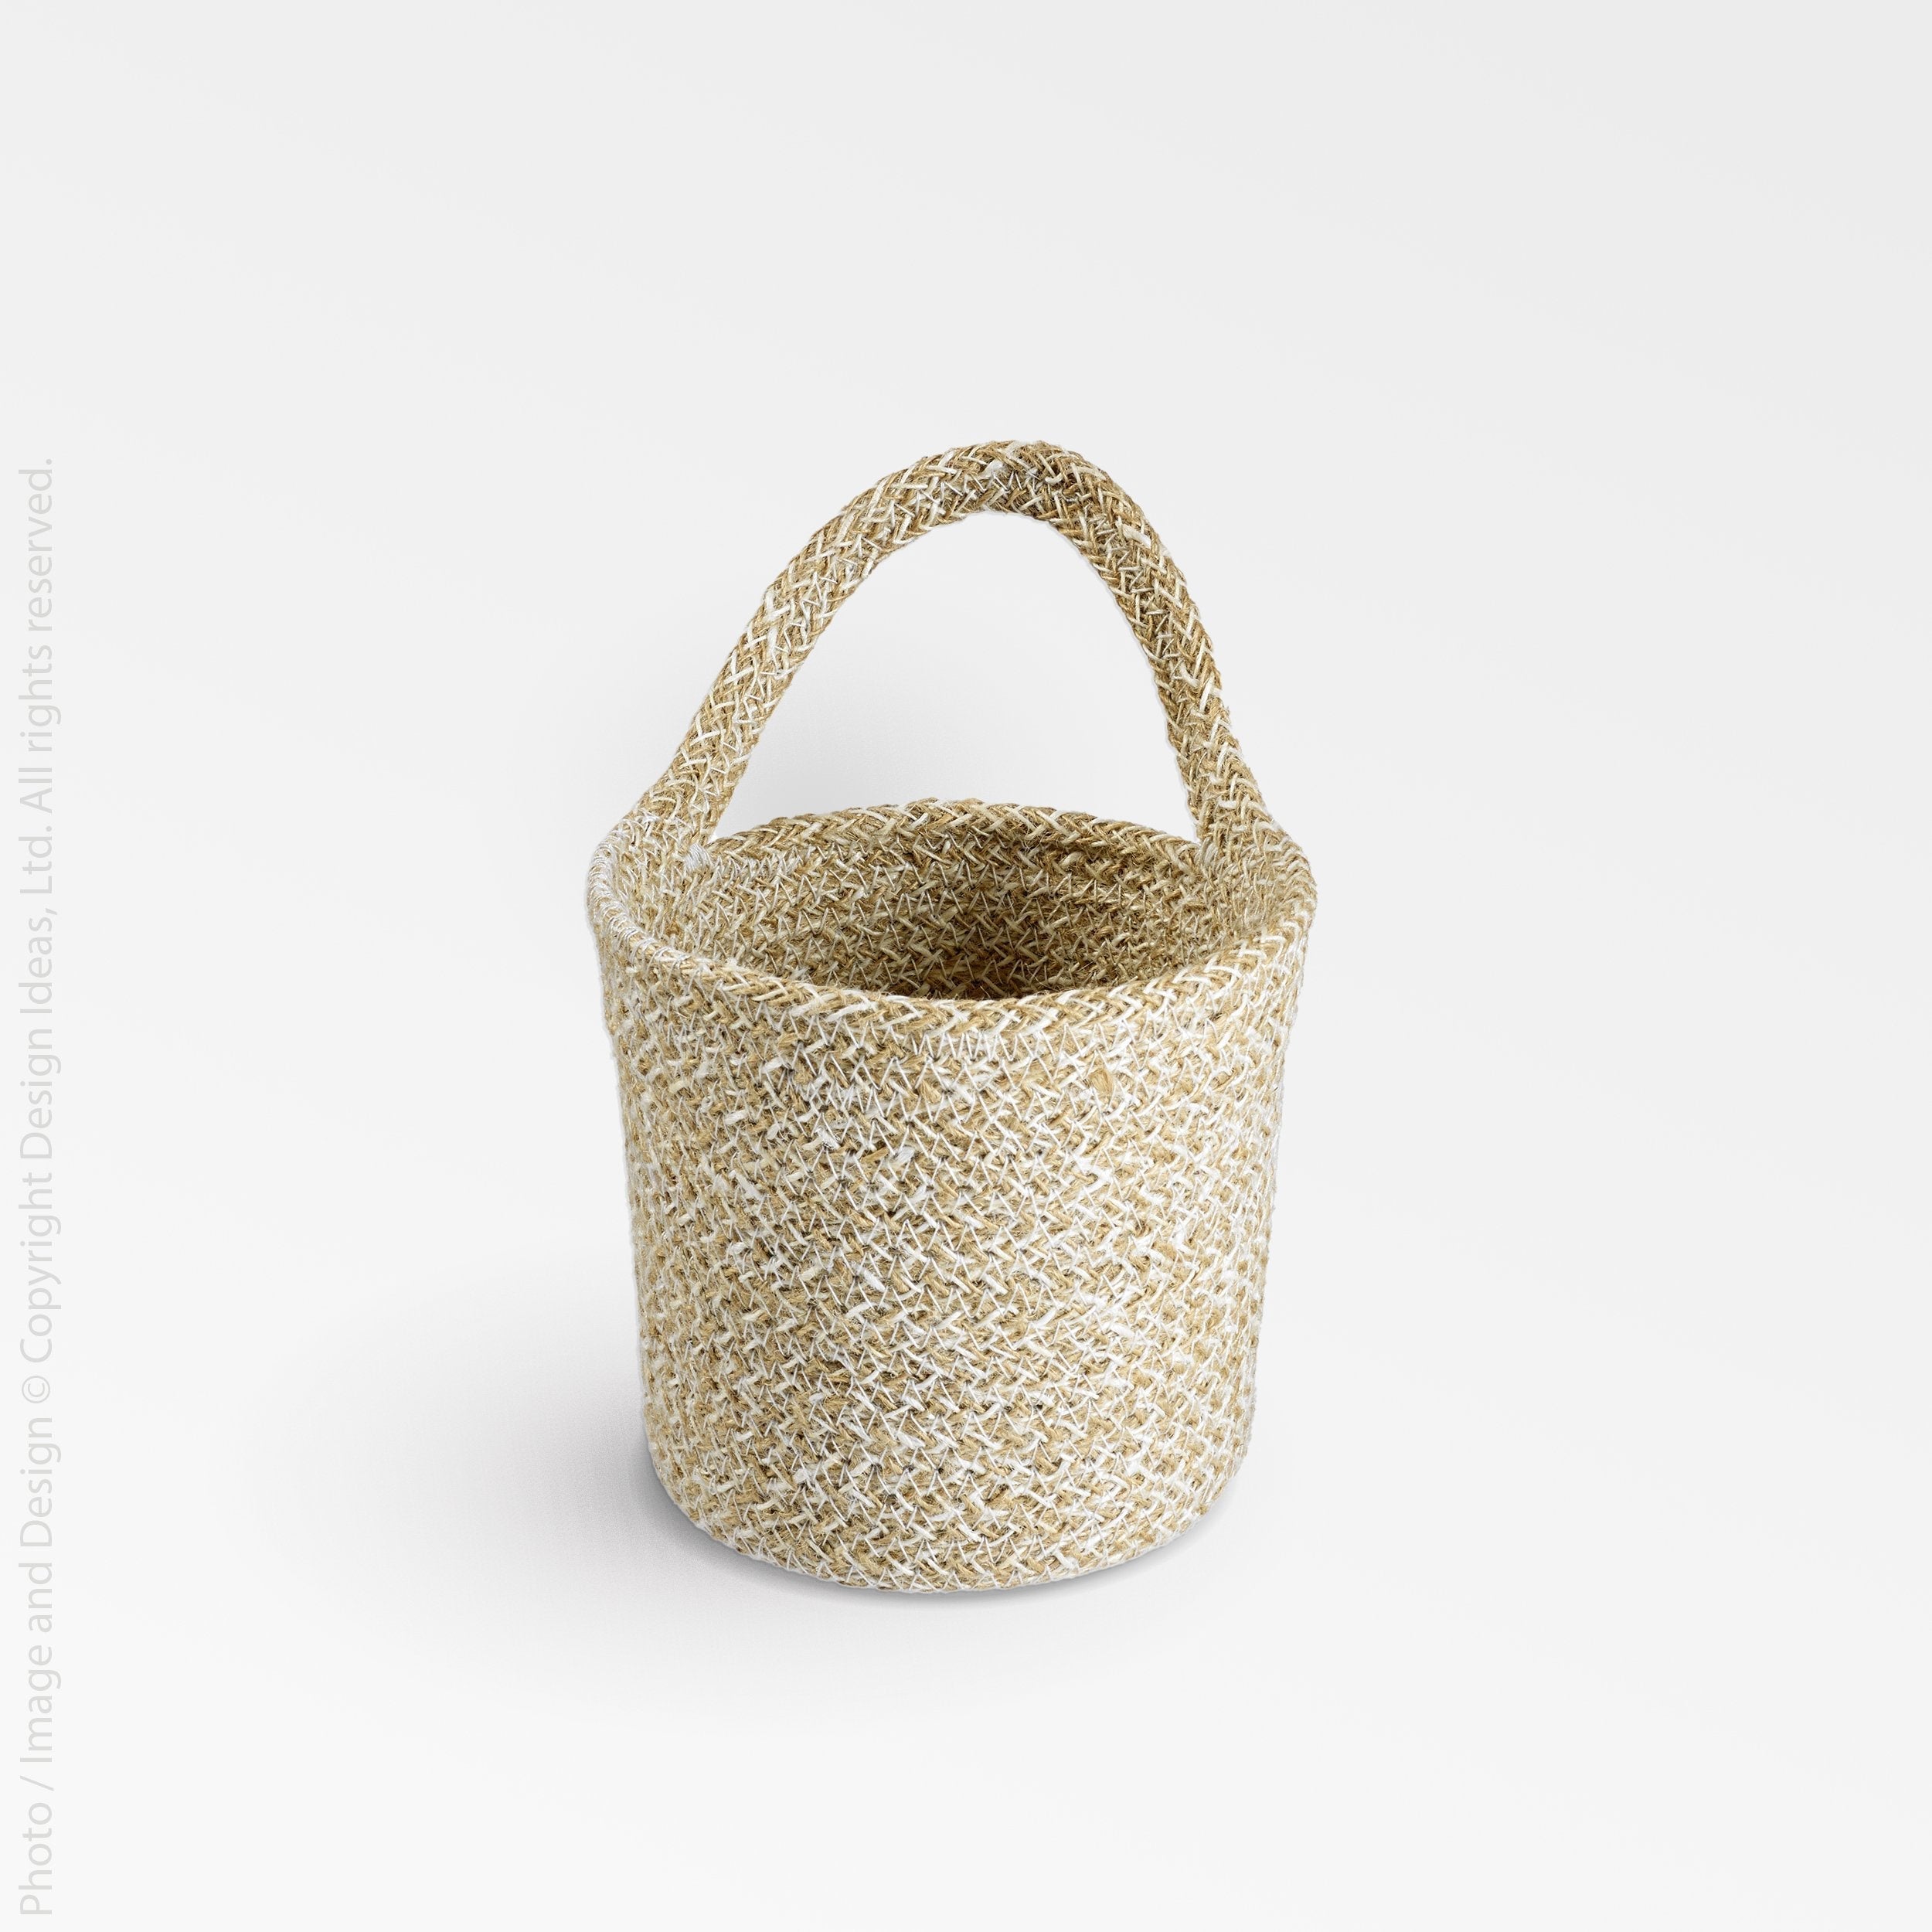 Melia™ hanging basket (4.6 x 5.2 x 4.8 in.) - Black | Image 1 | Premium Basket from the Melia collection | made with Jute for long lasting use | texxture